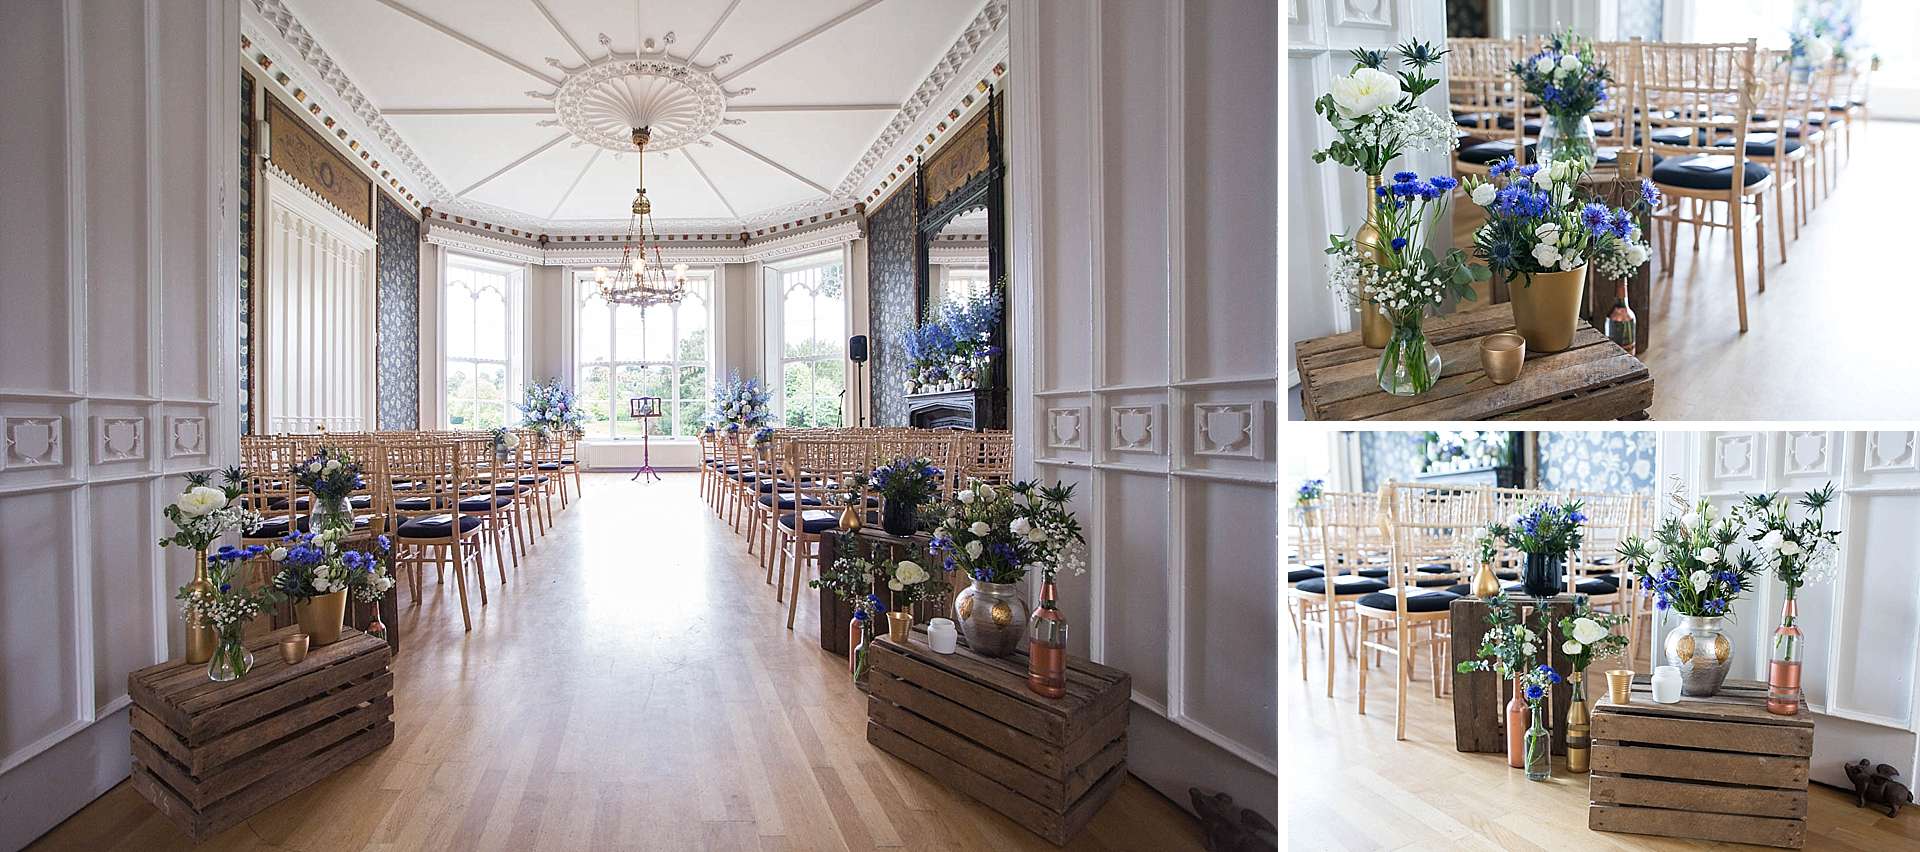 Nonsuch - Orchid Room - Ceremony